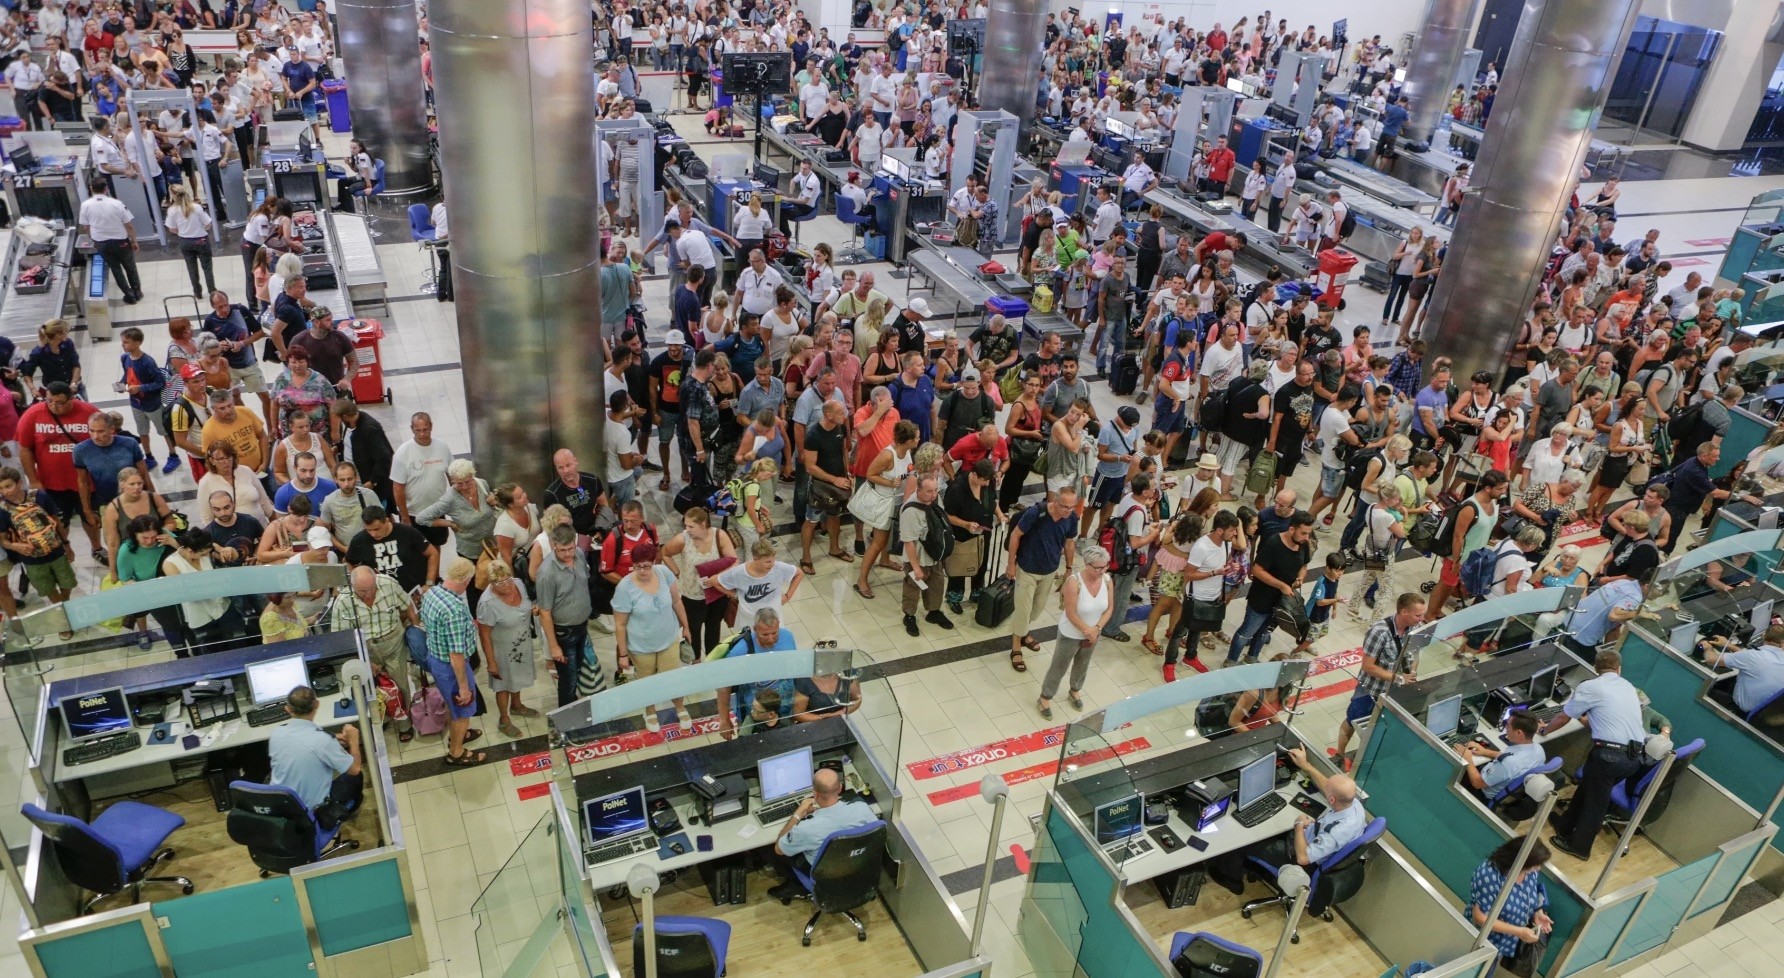 People wait in line for the security and passport control at Antalya International Airport, Turkey on Aug. 10.